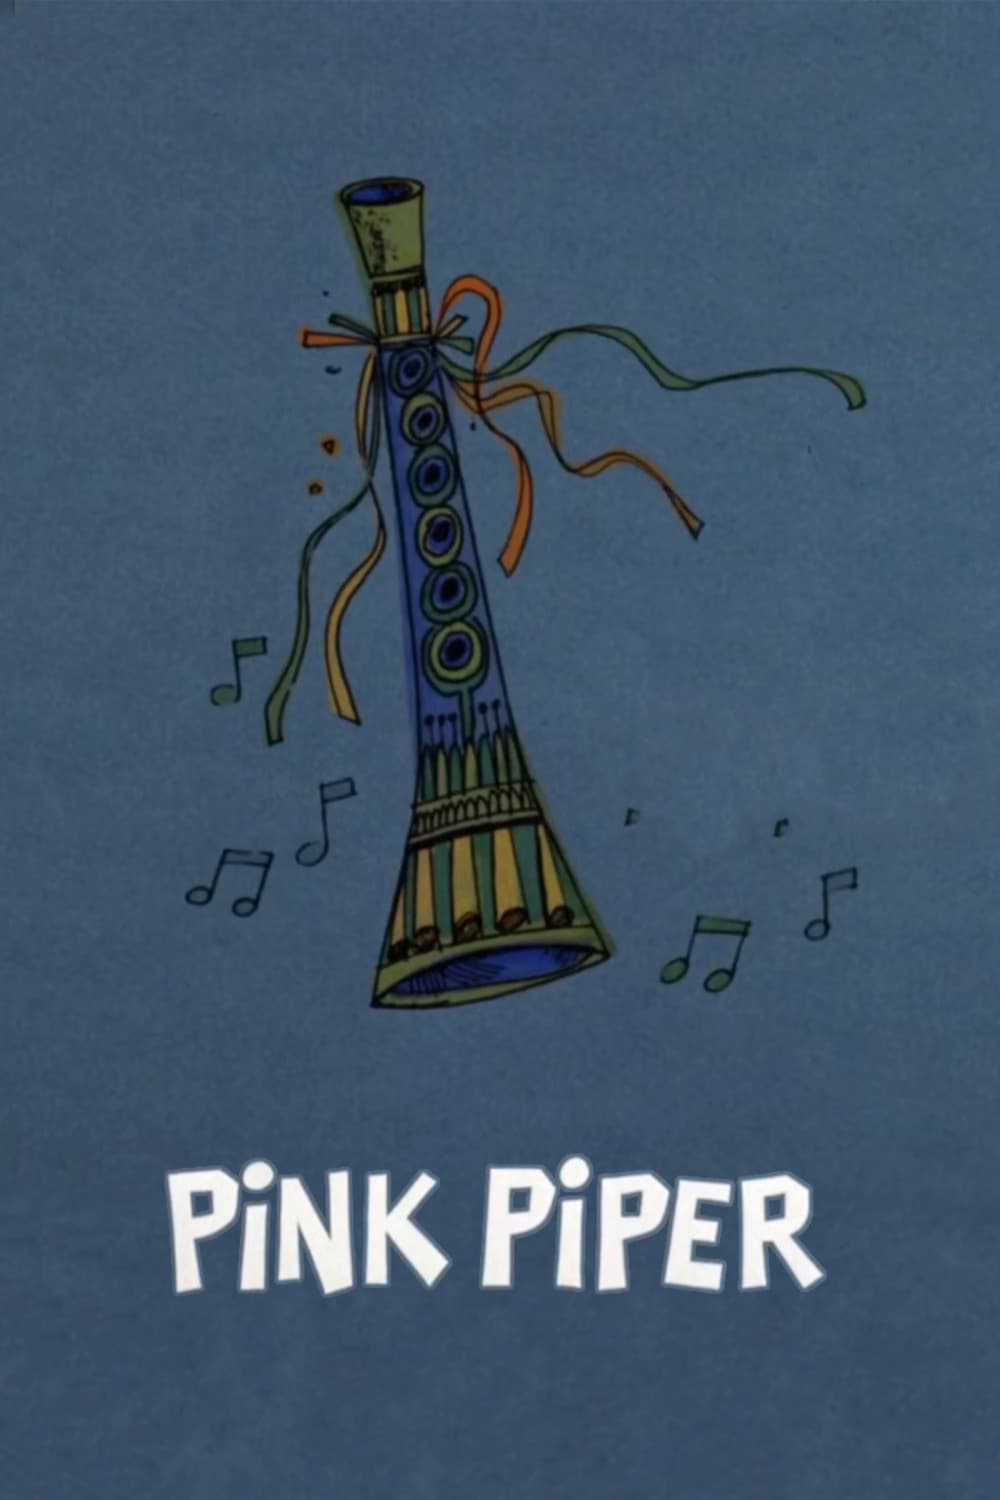 Pink Piper (1976)